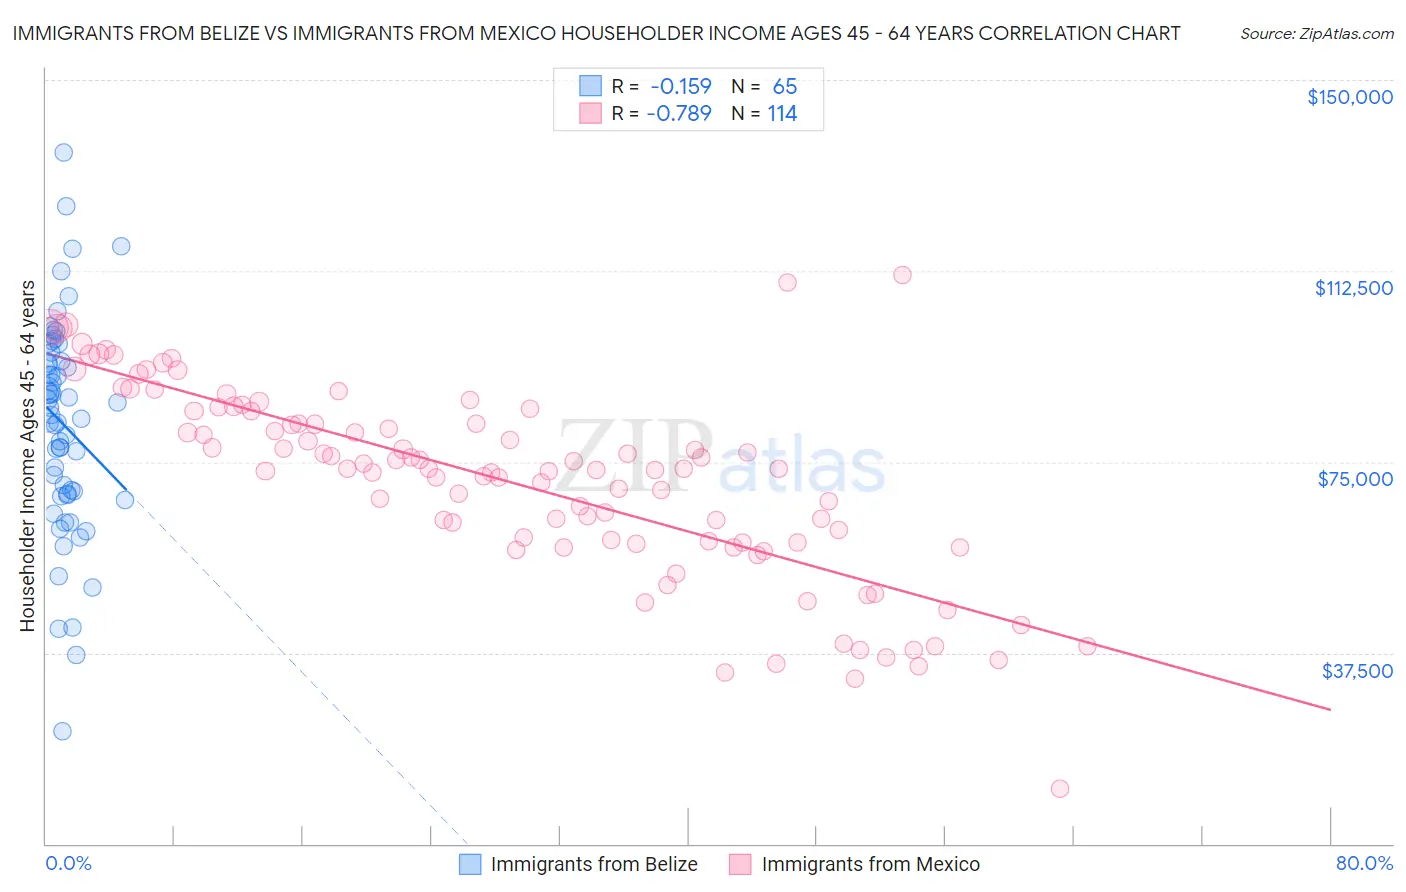 Immigrants from Belize vs Immigrants from Mexico Householder Income Ages 45 - 64 years